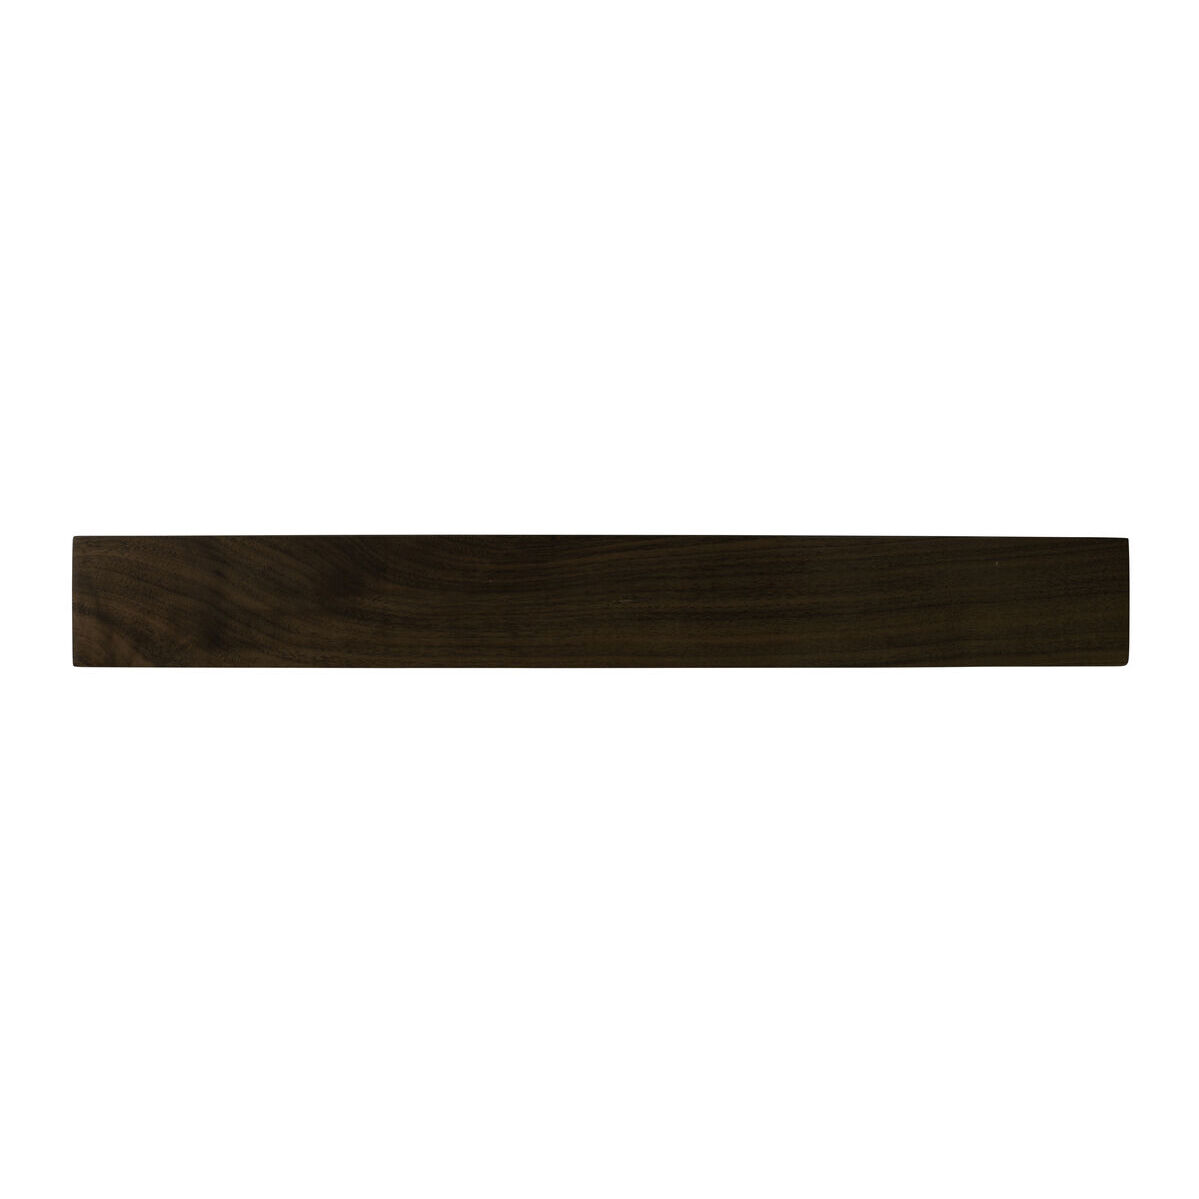 Cheftech Walnut Magnetic Knf Rack 45cm